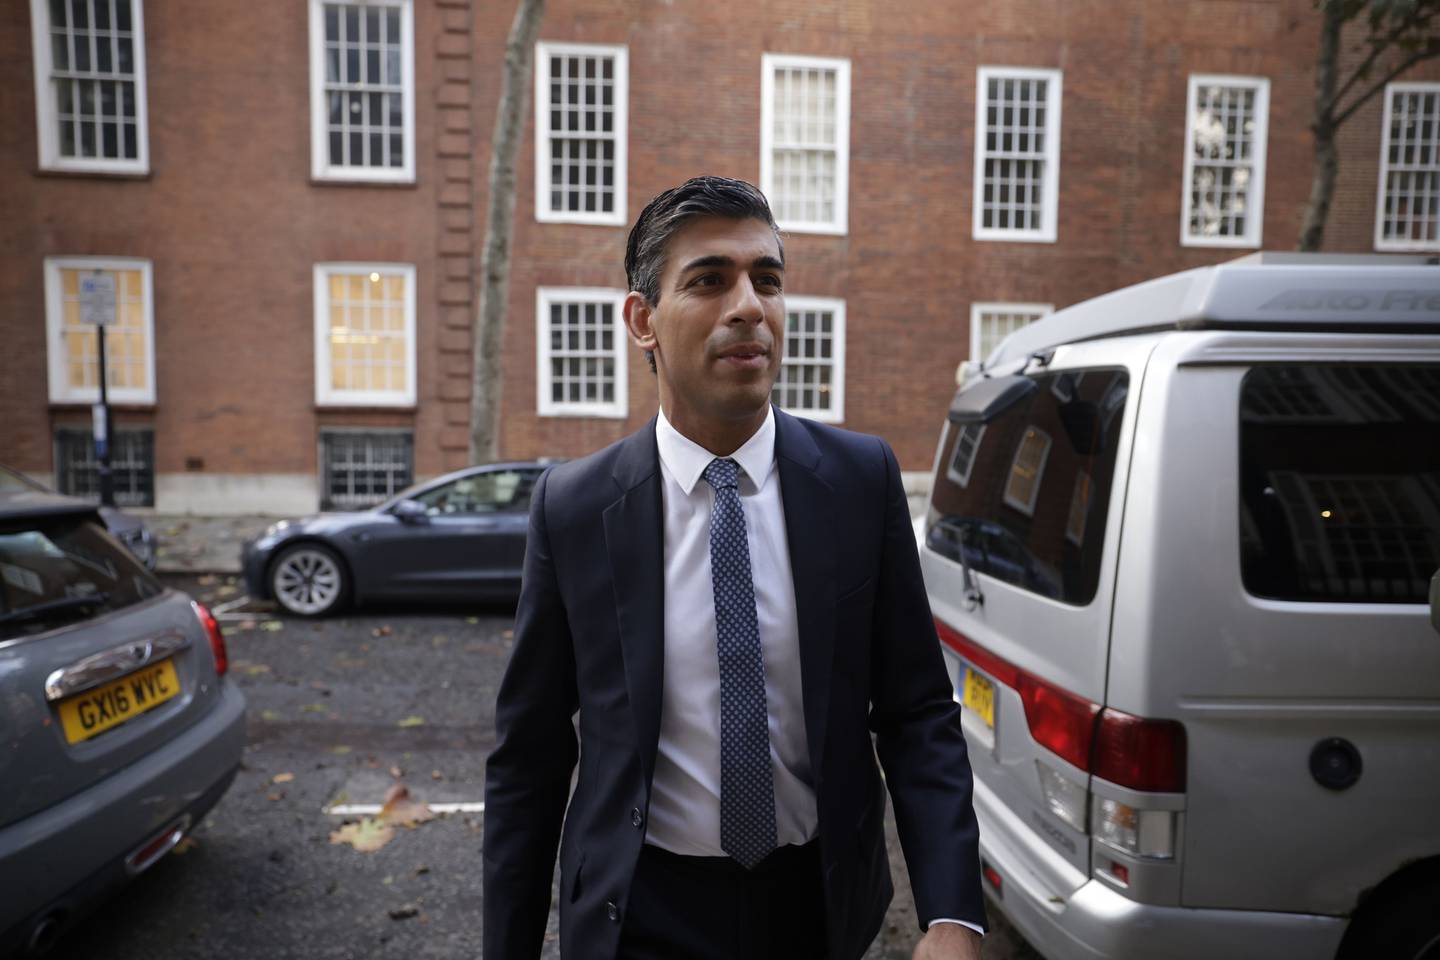 Many MPs in marginal seats sided with Rishi Sunak's campaign to lead Britain. Bloomberg